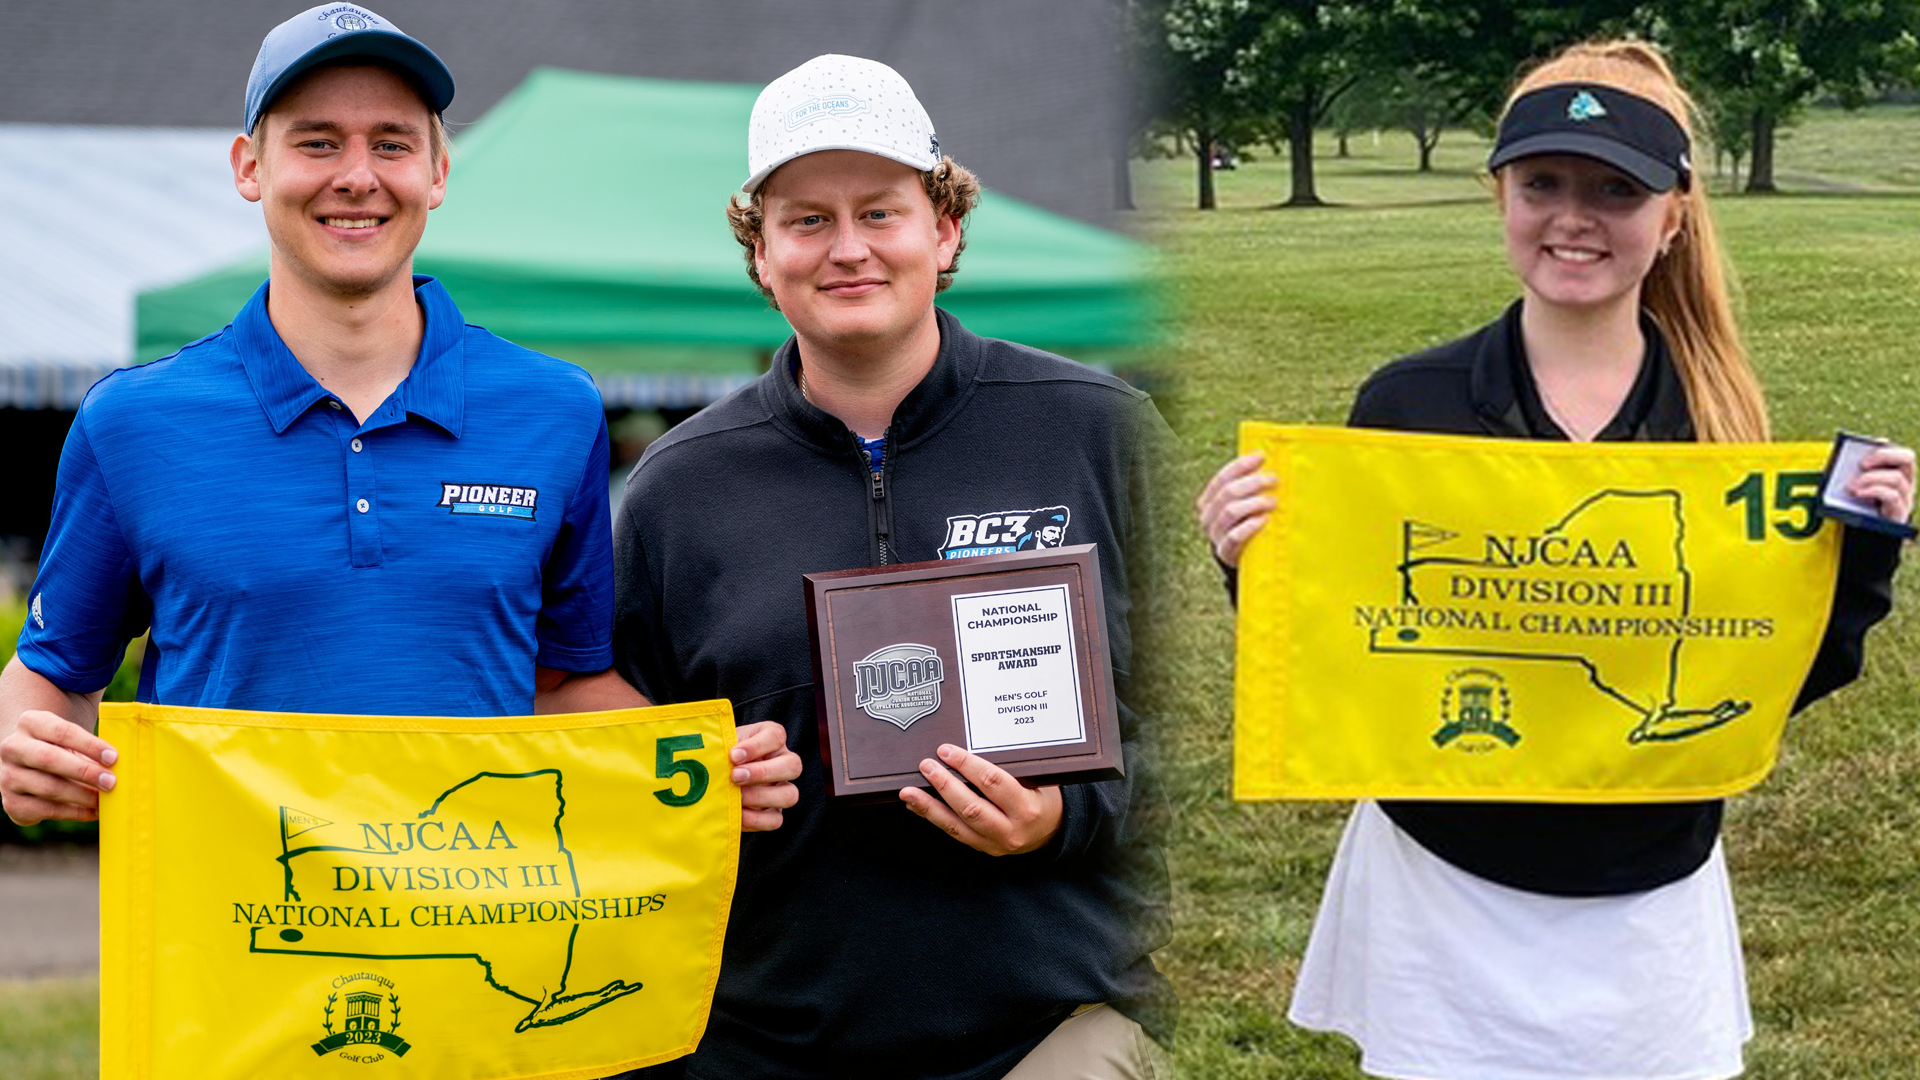 Region 20 Trio Earn Recognition at NJCAA Golf Championships